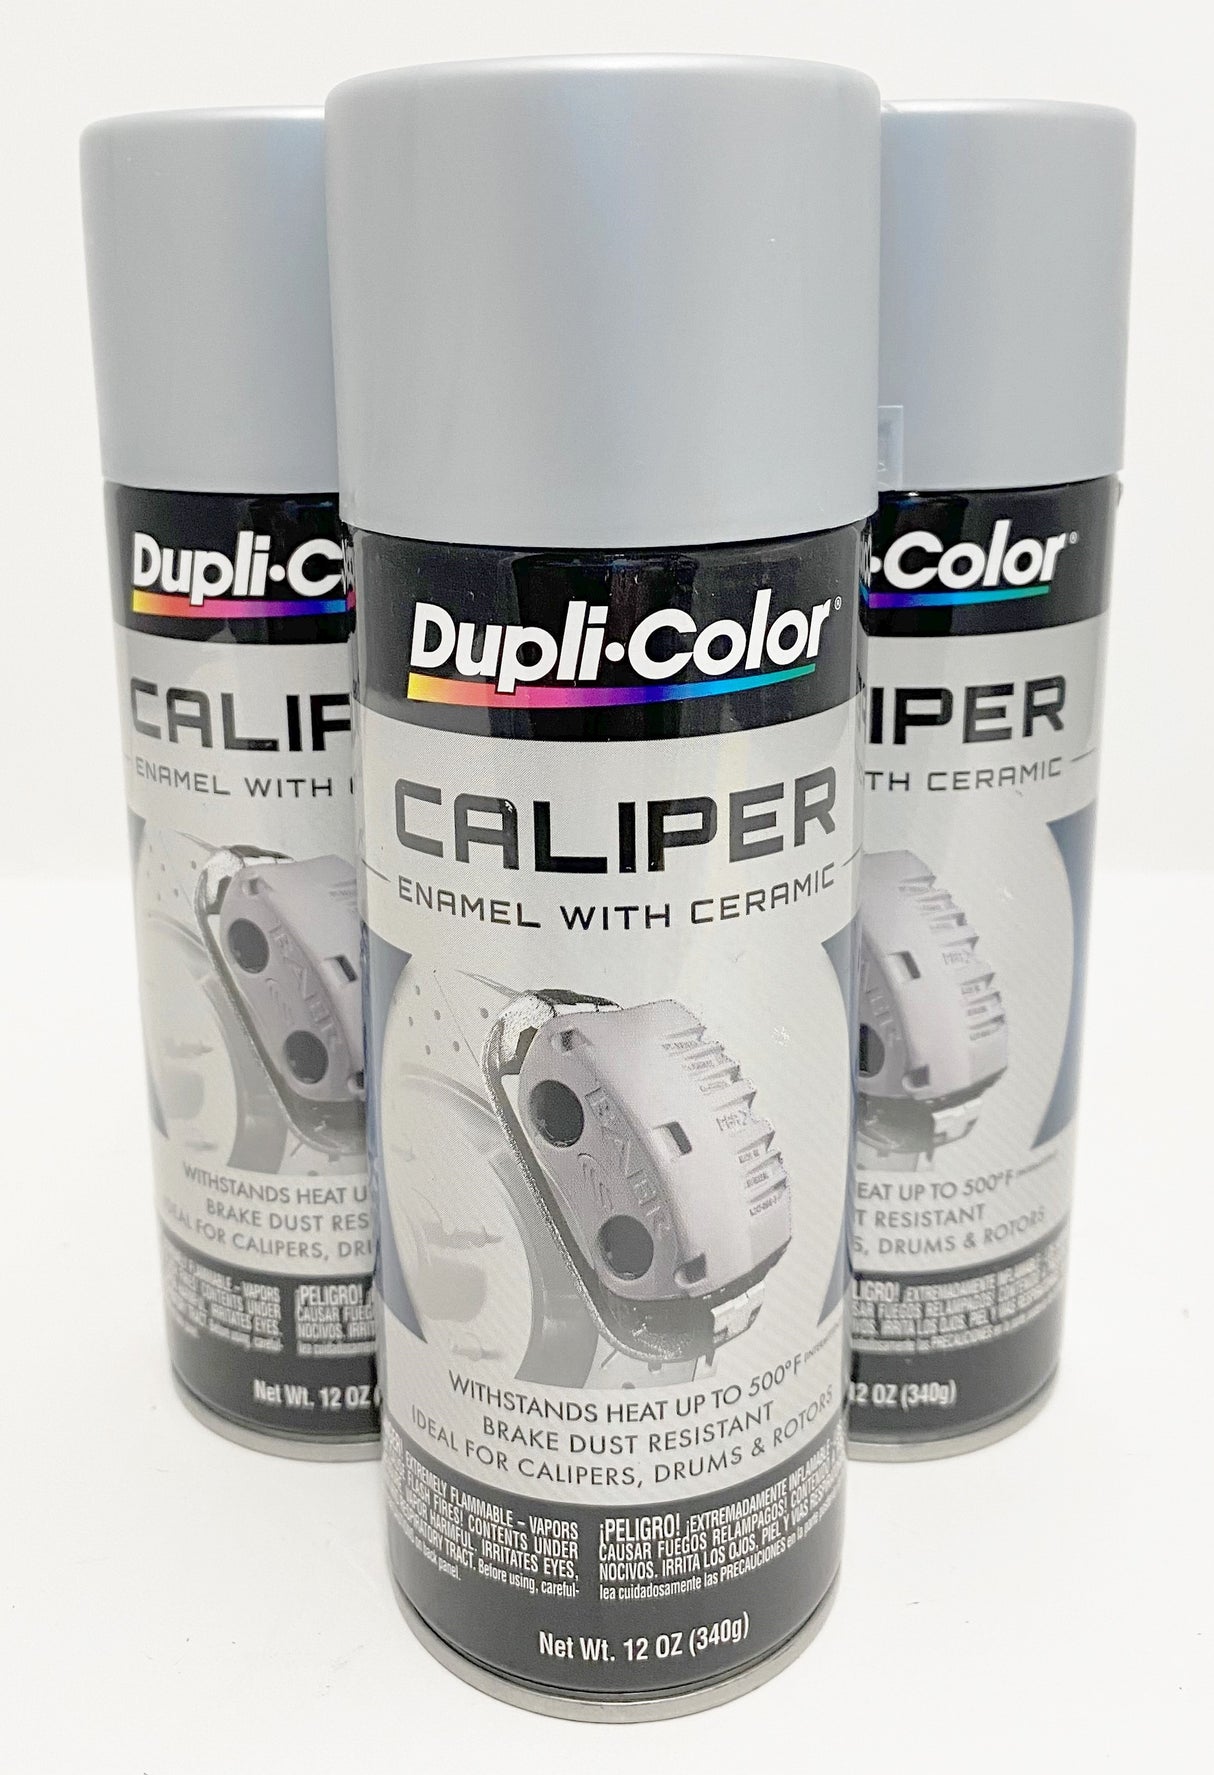 Duplicolor BCP103 - 3 Pack Caliper Spray Paint with Ceramic - 12 oz